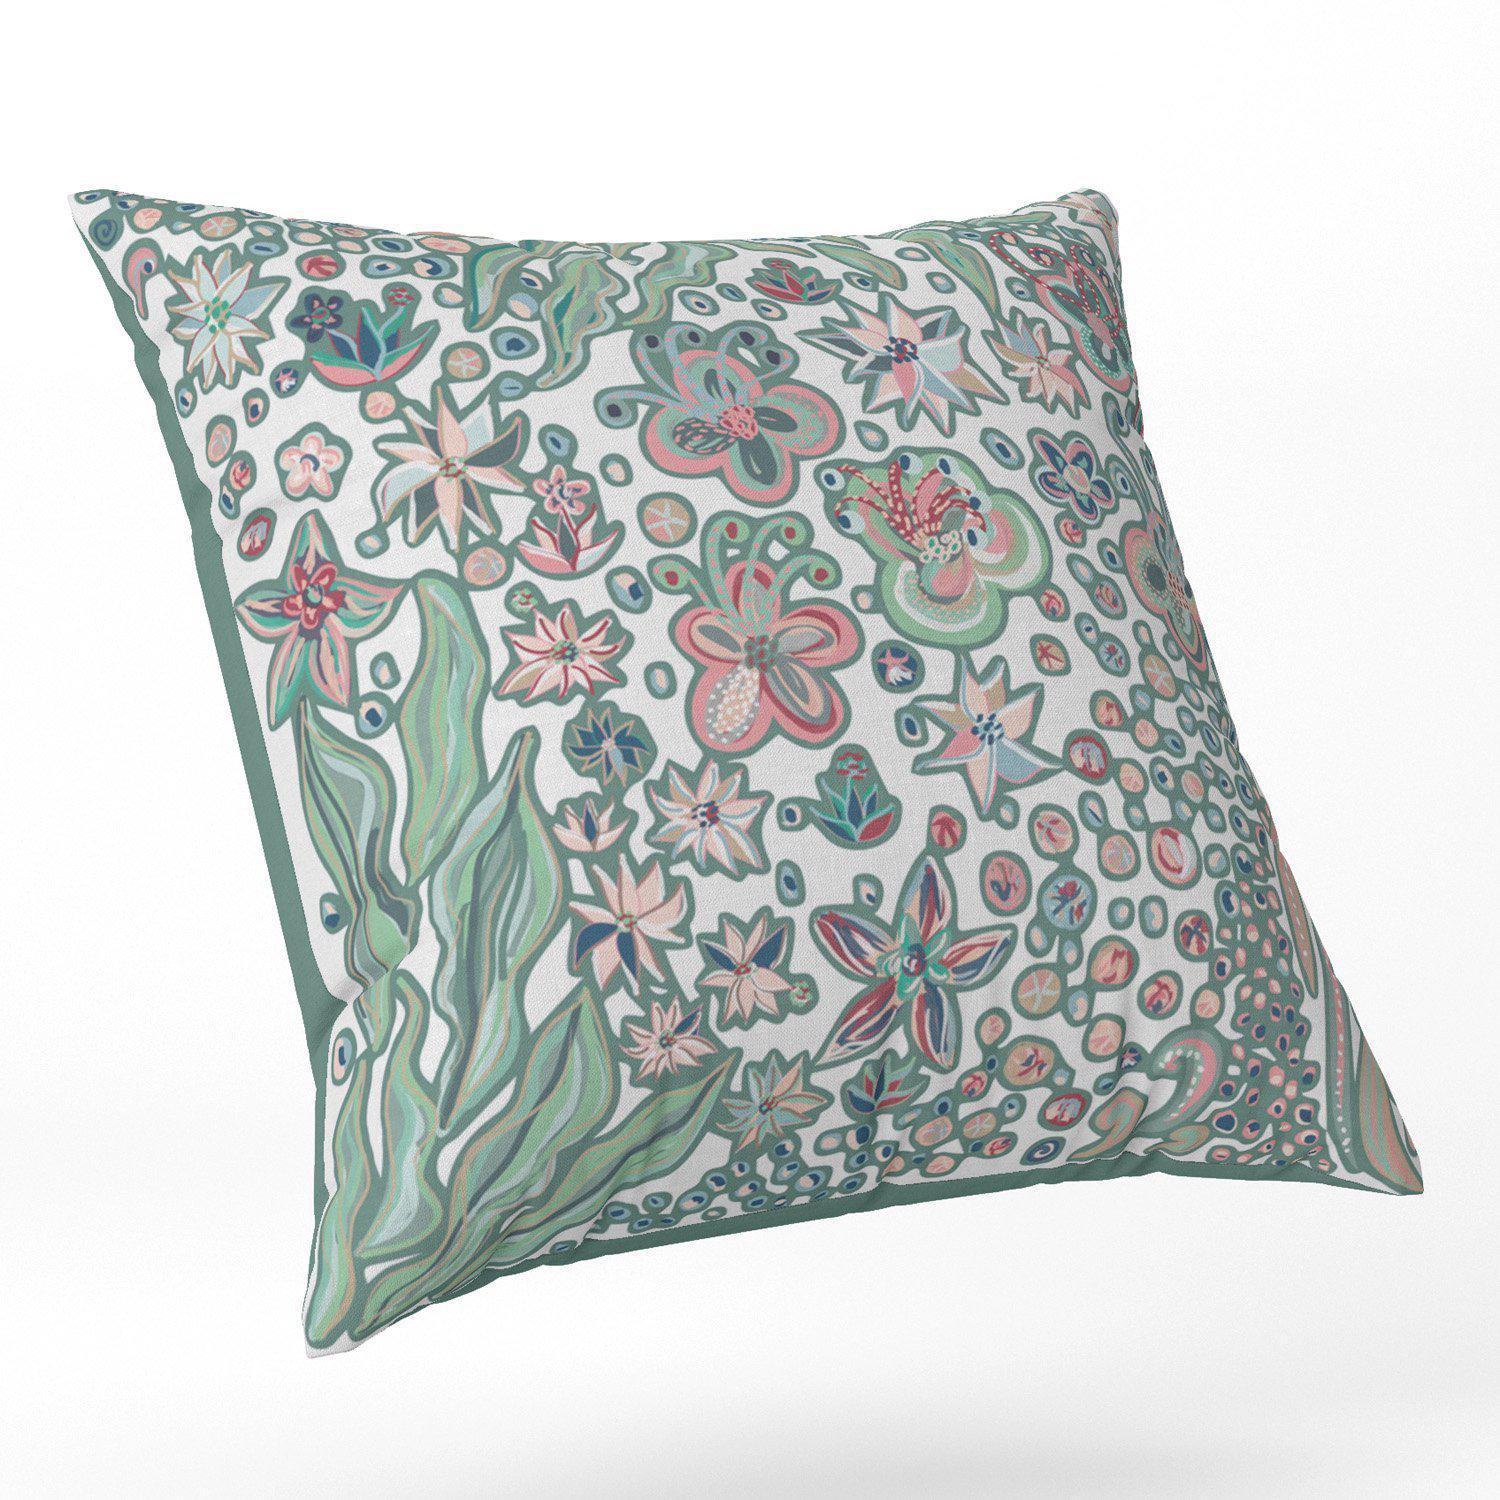 Indian Dreams (White) - Funky Art Cushion - Bellissima - House Of Turnowsky Pillows - Handmade Cushions UK - WeLoveCushions